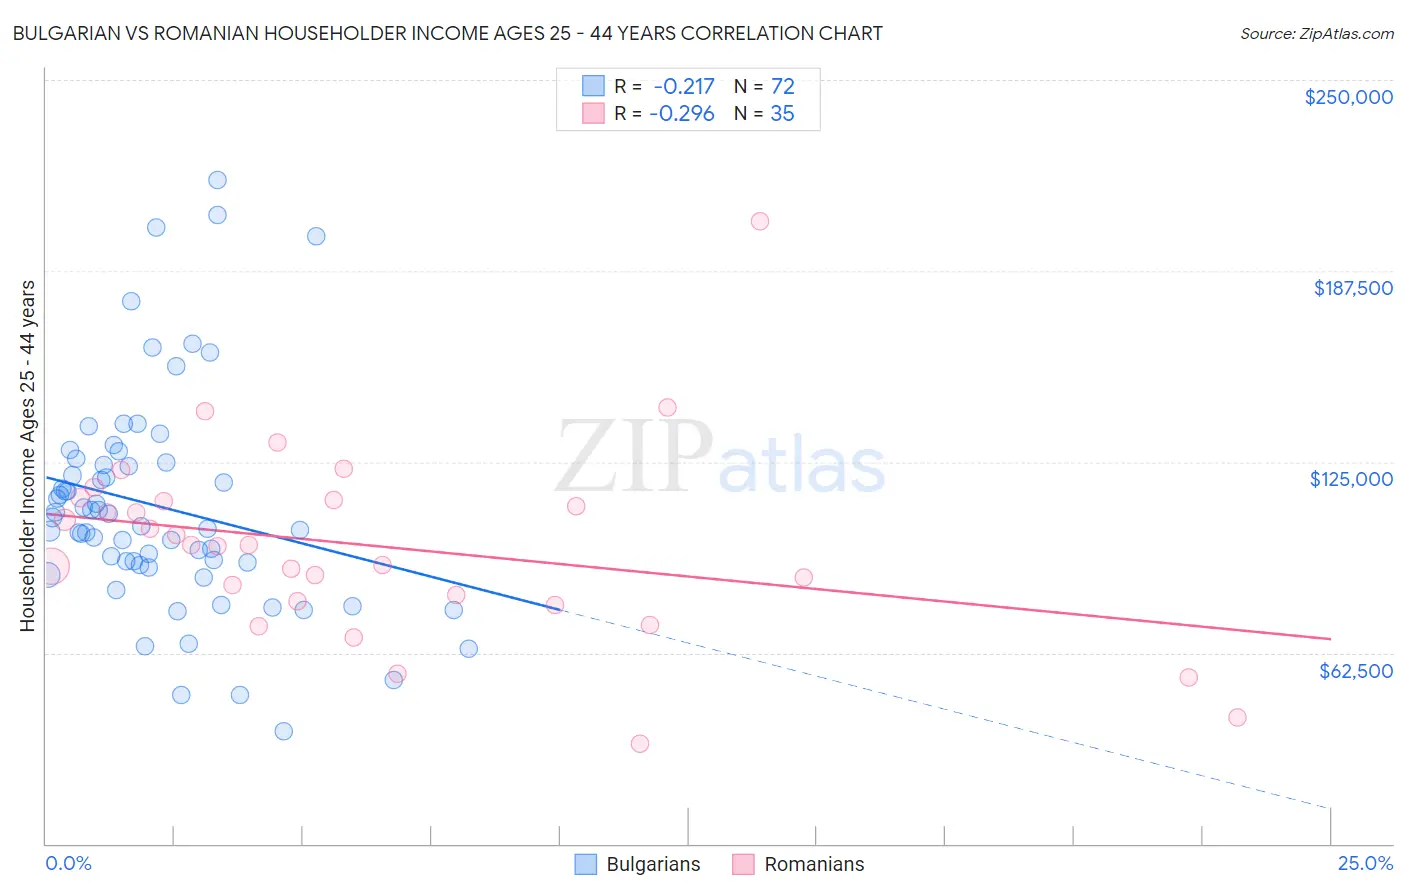 Bulgarian vs Romanian Householder Income Ages 25 - 44 years